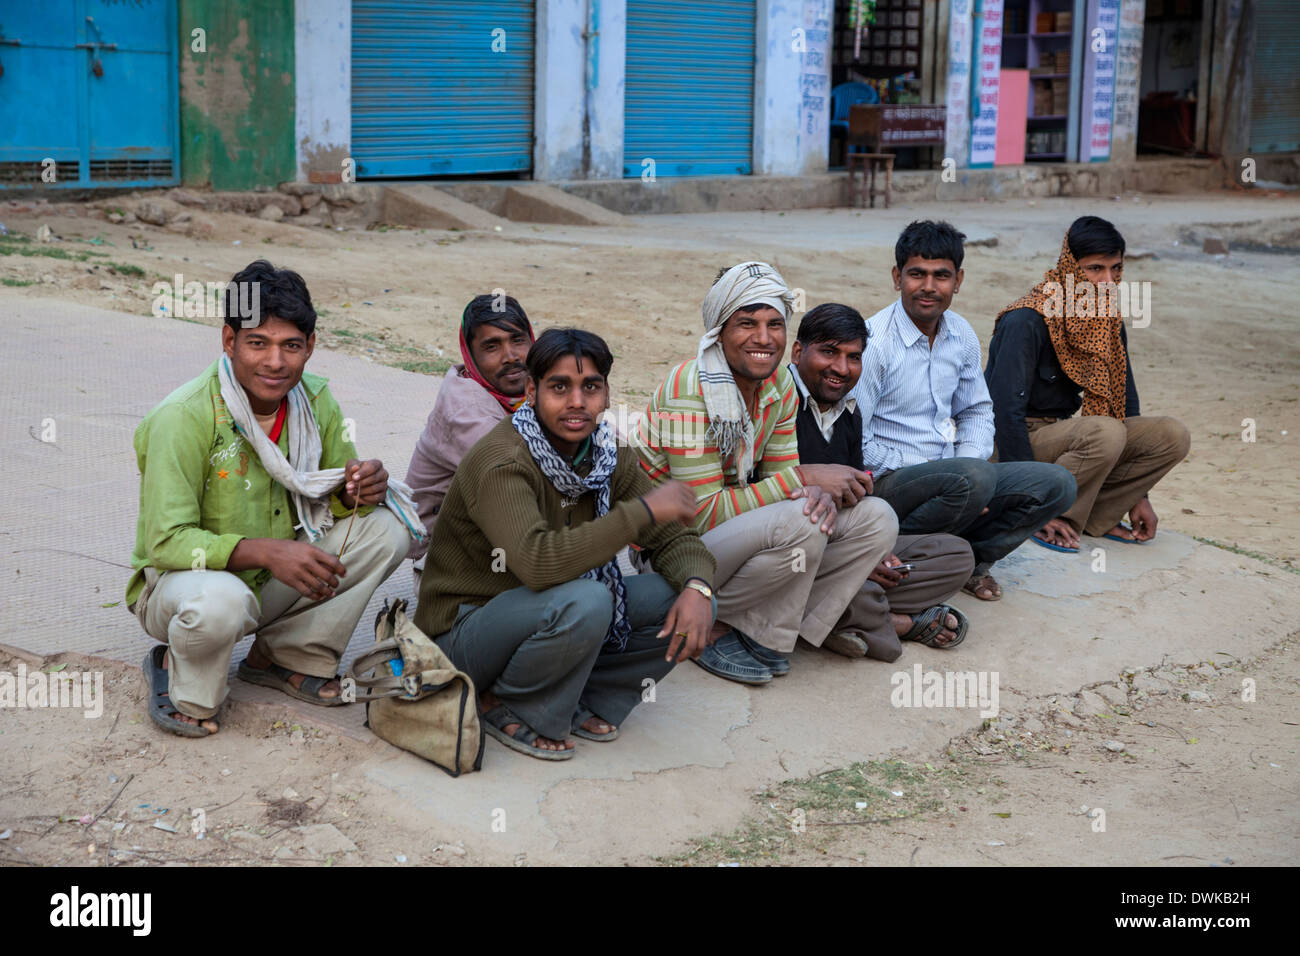 Bharatpur, Rajasthan, India. Young Men Sitting Together at the end of the Day. Stock Photo